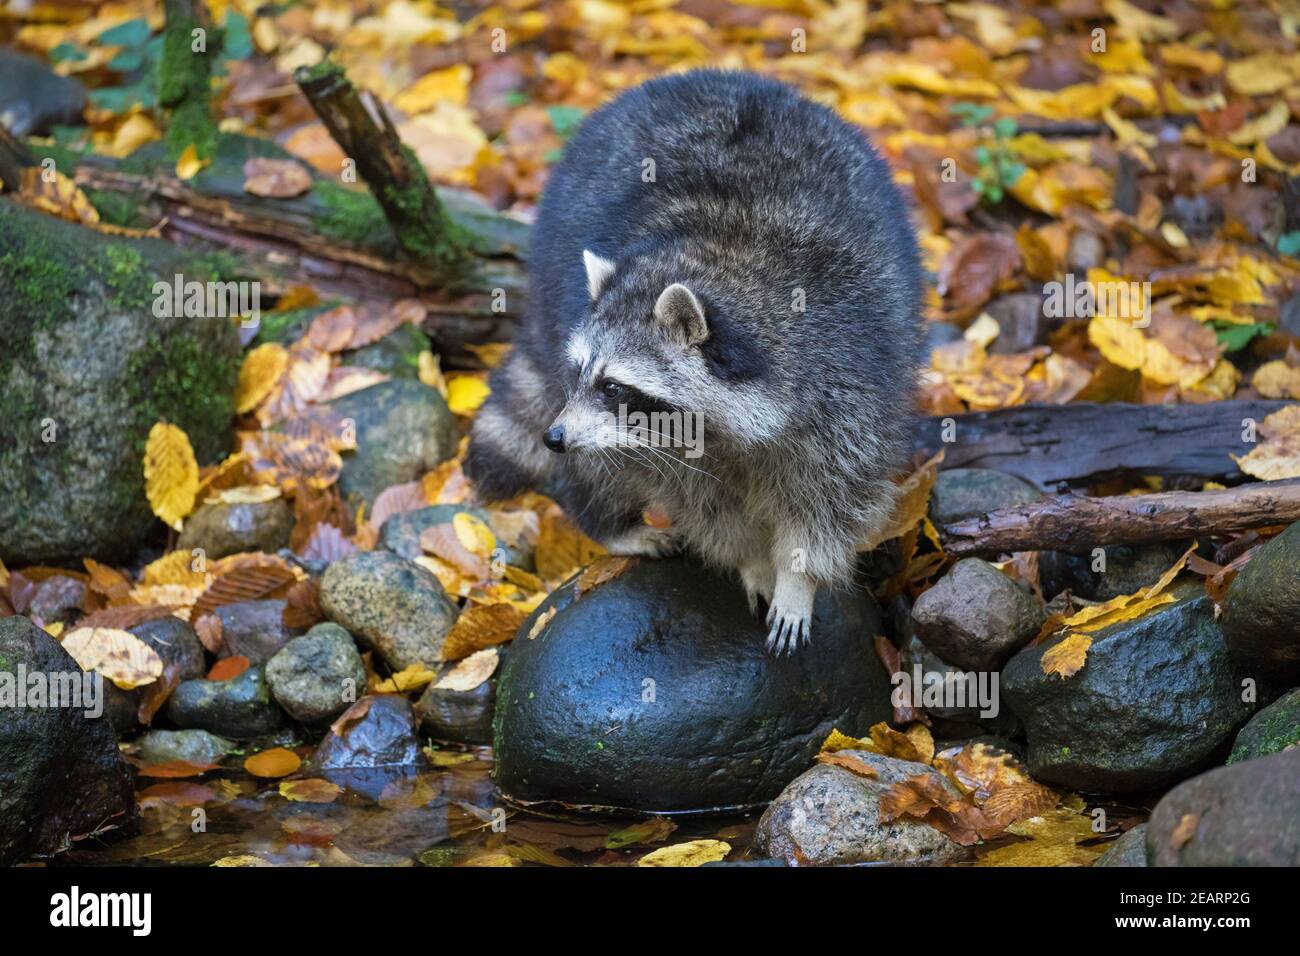 Raccoon (Procyon lotor), invasive species native to North America, foraging along brook / stream Stock Photo